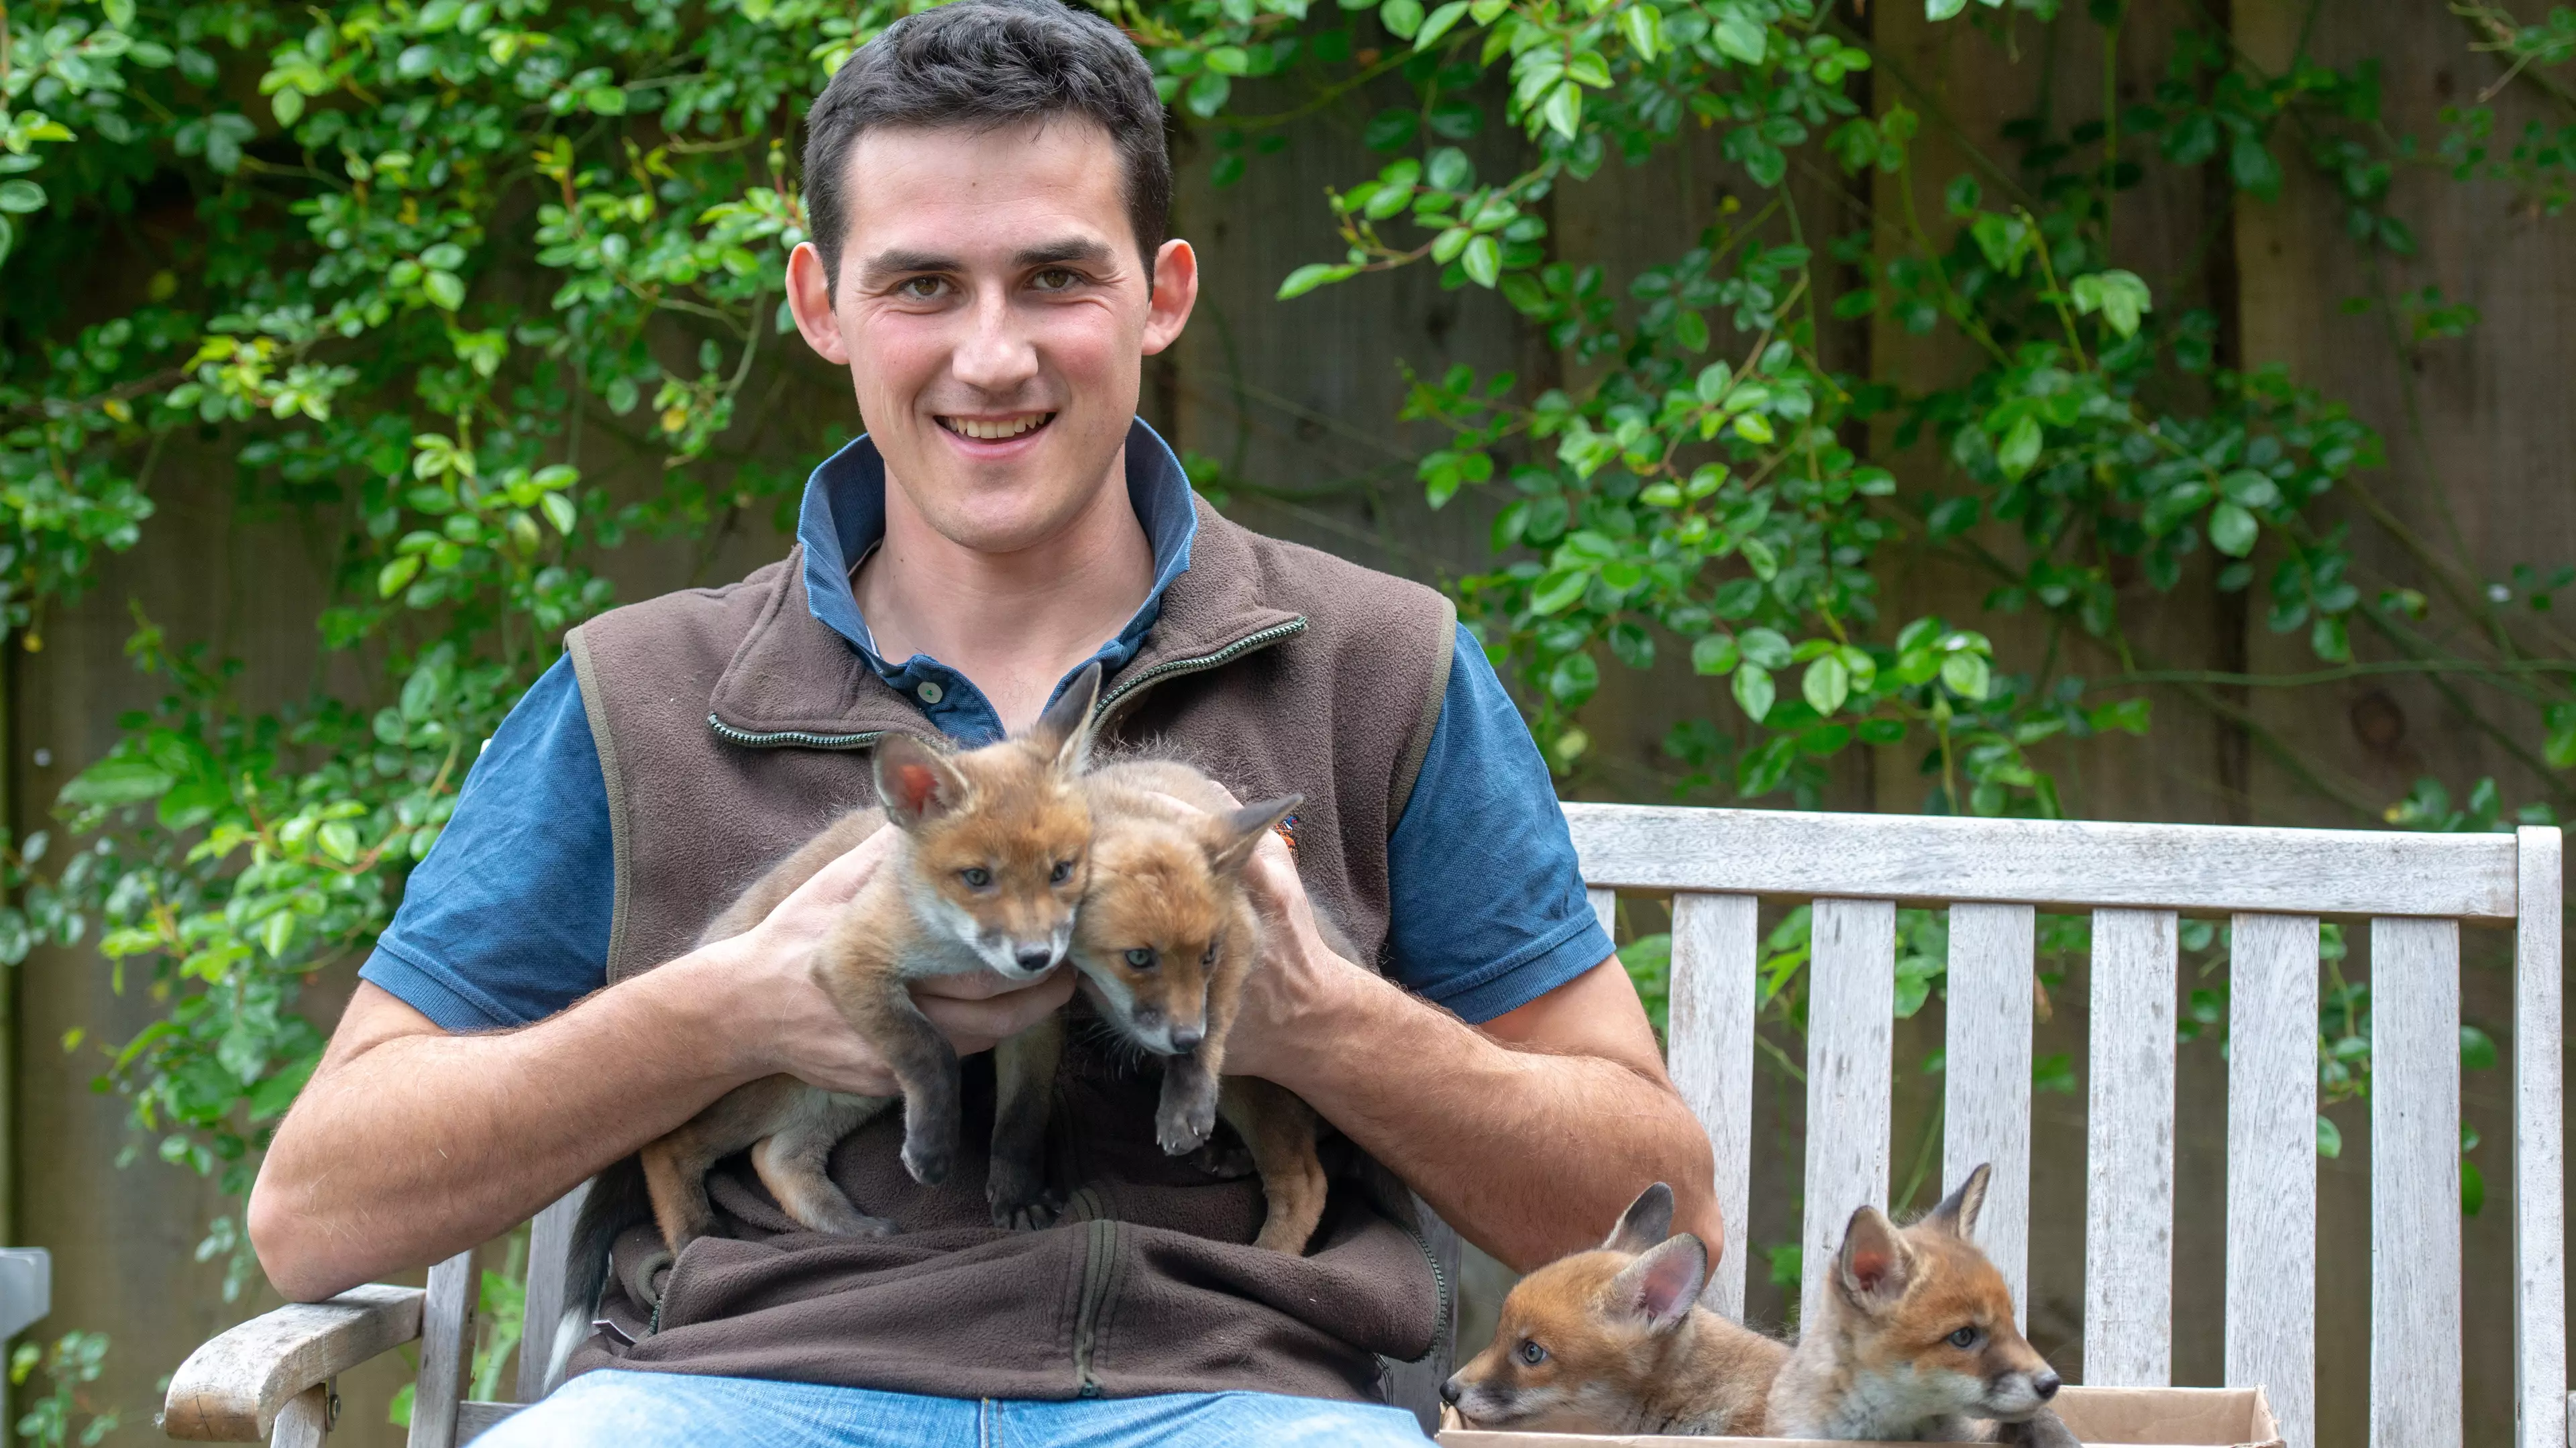 Man Saves Four Fox Cubs By Carrying Out Emergency C-Section